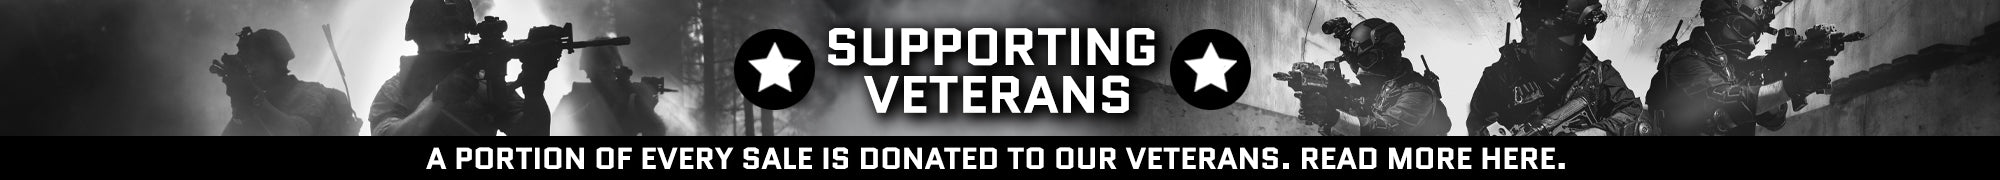 Supporting Veterans. A portion of every sale is donated to our veterans.